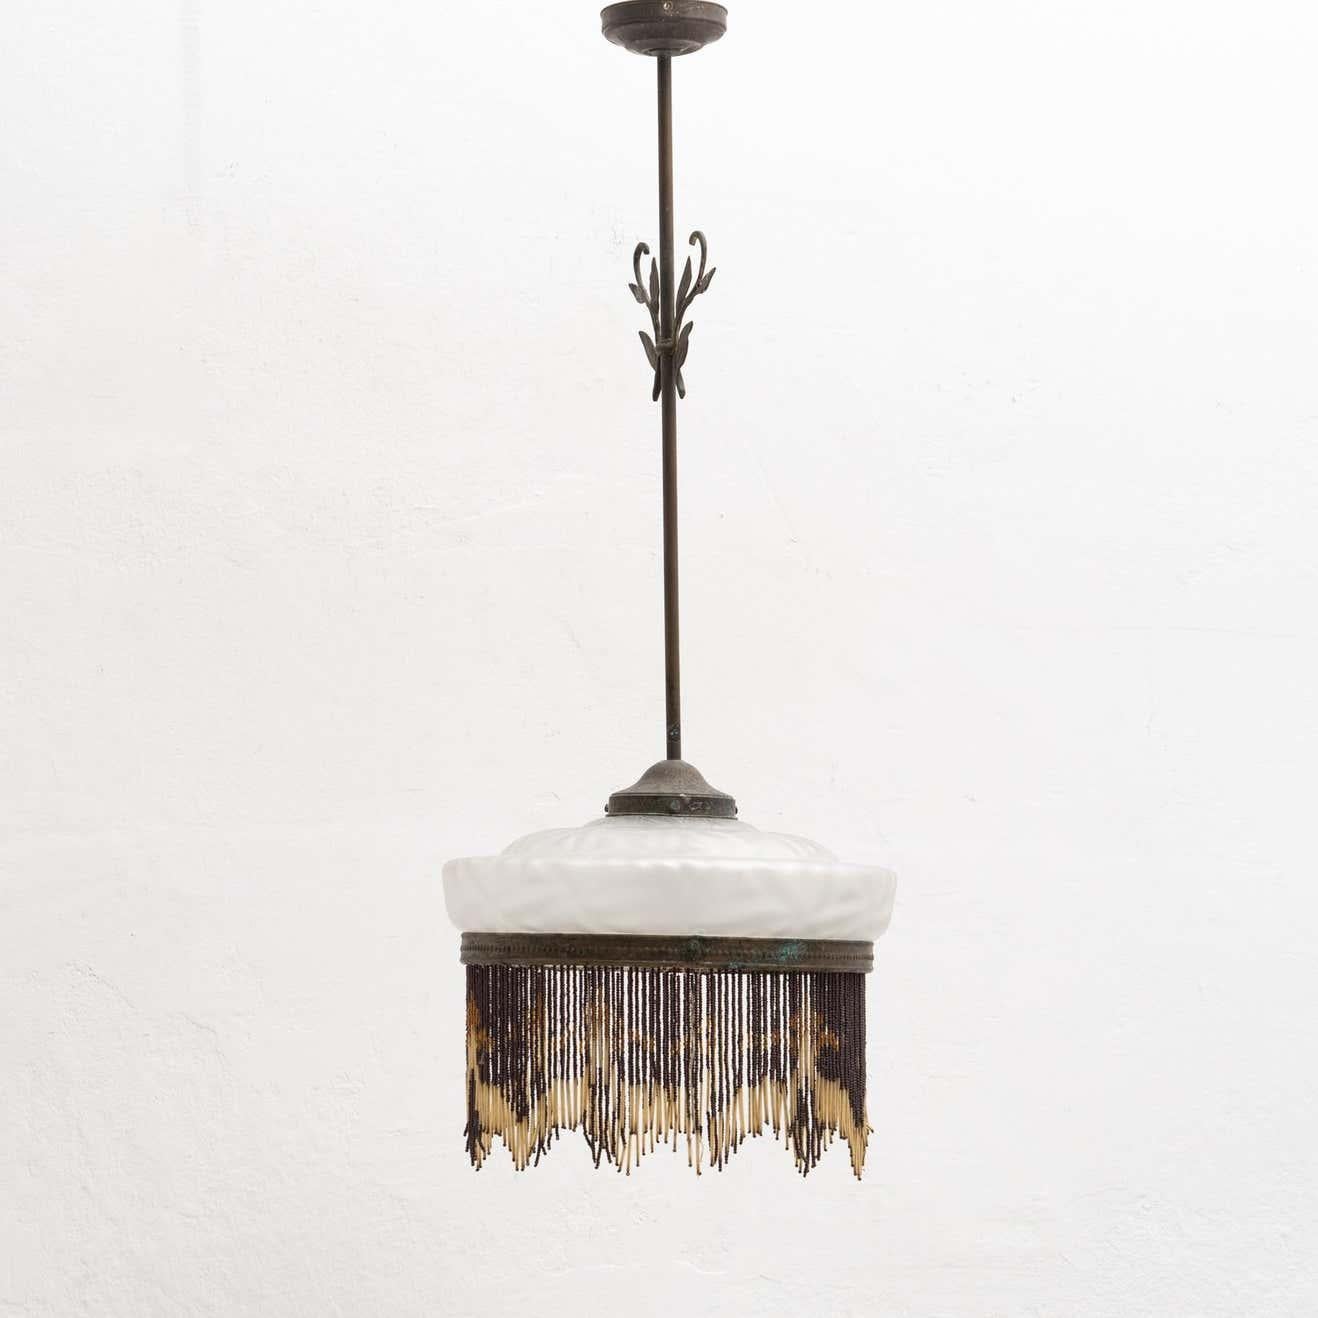 Vintage French Metal and Glass Art Deco Ceiling Lamp, circa 1930 For Sale 2